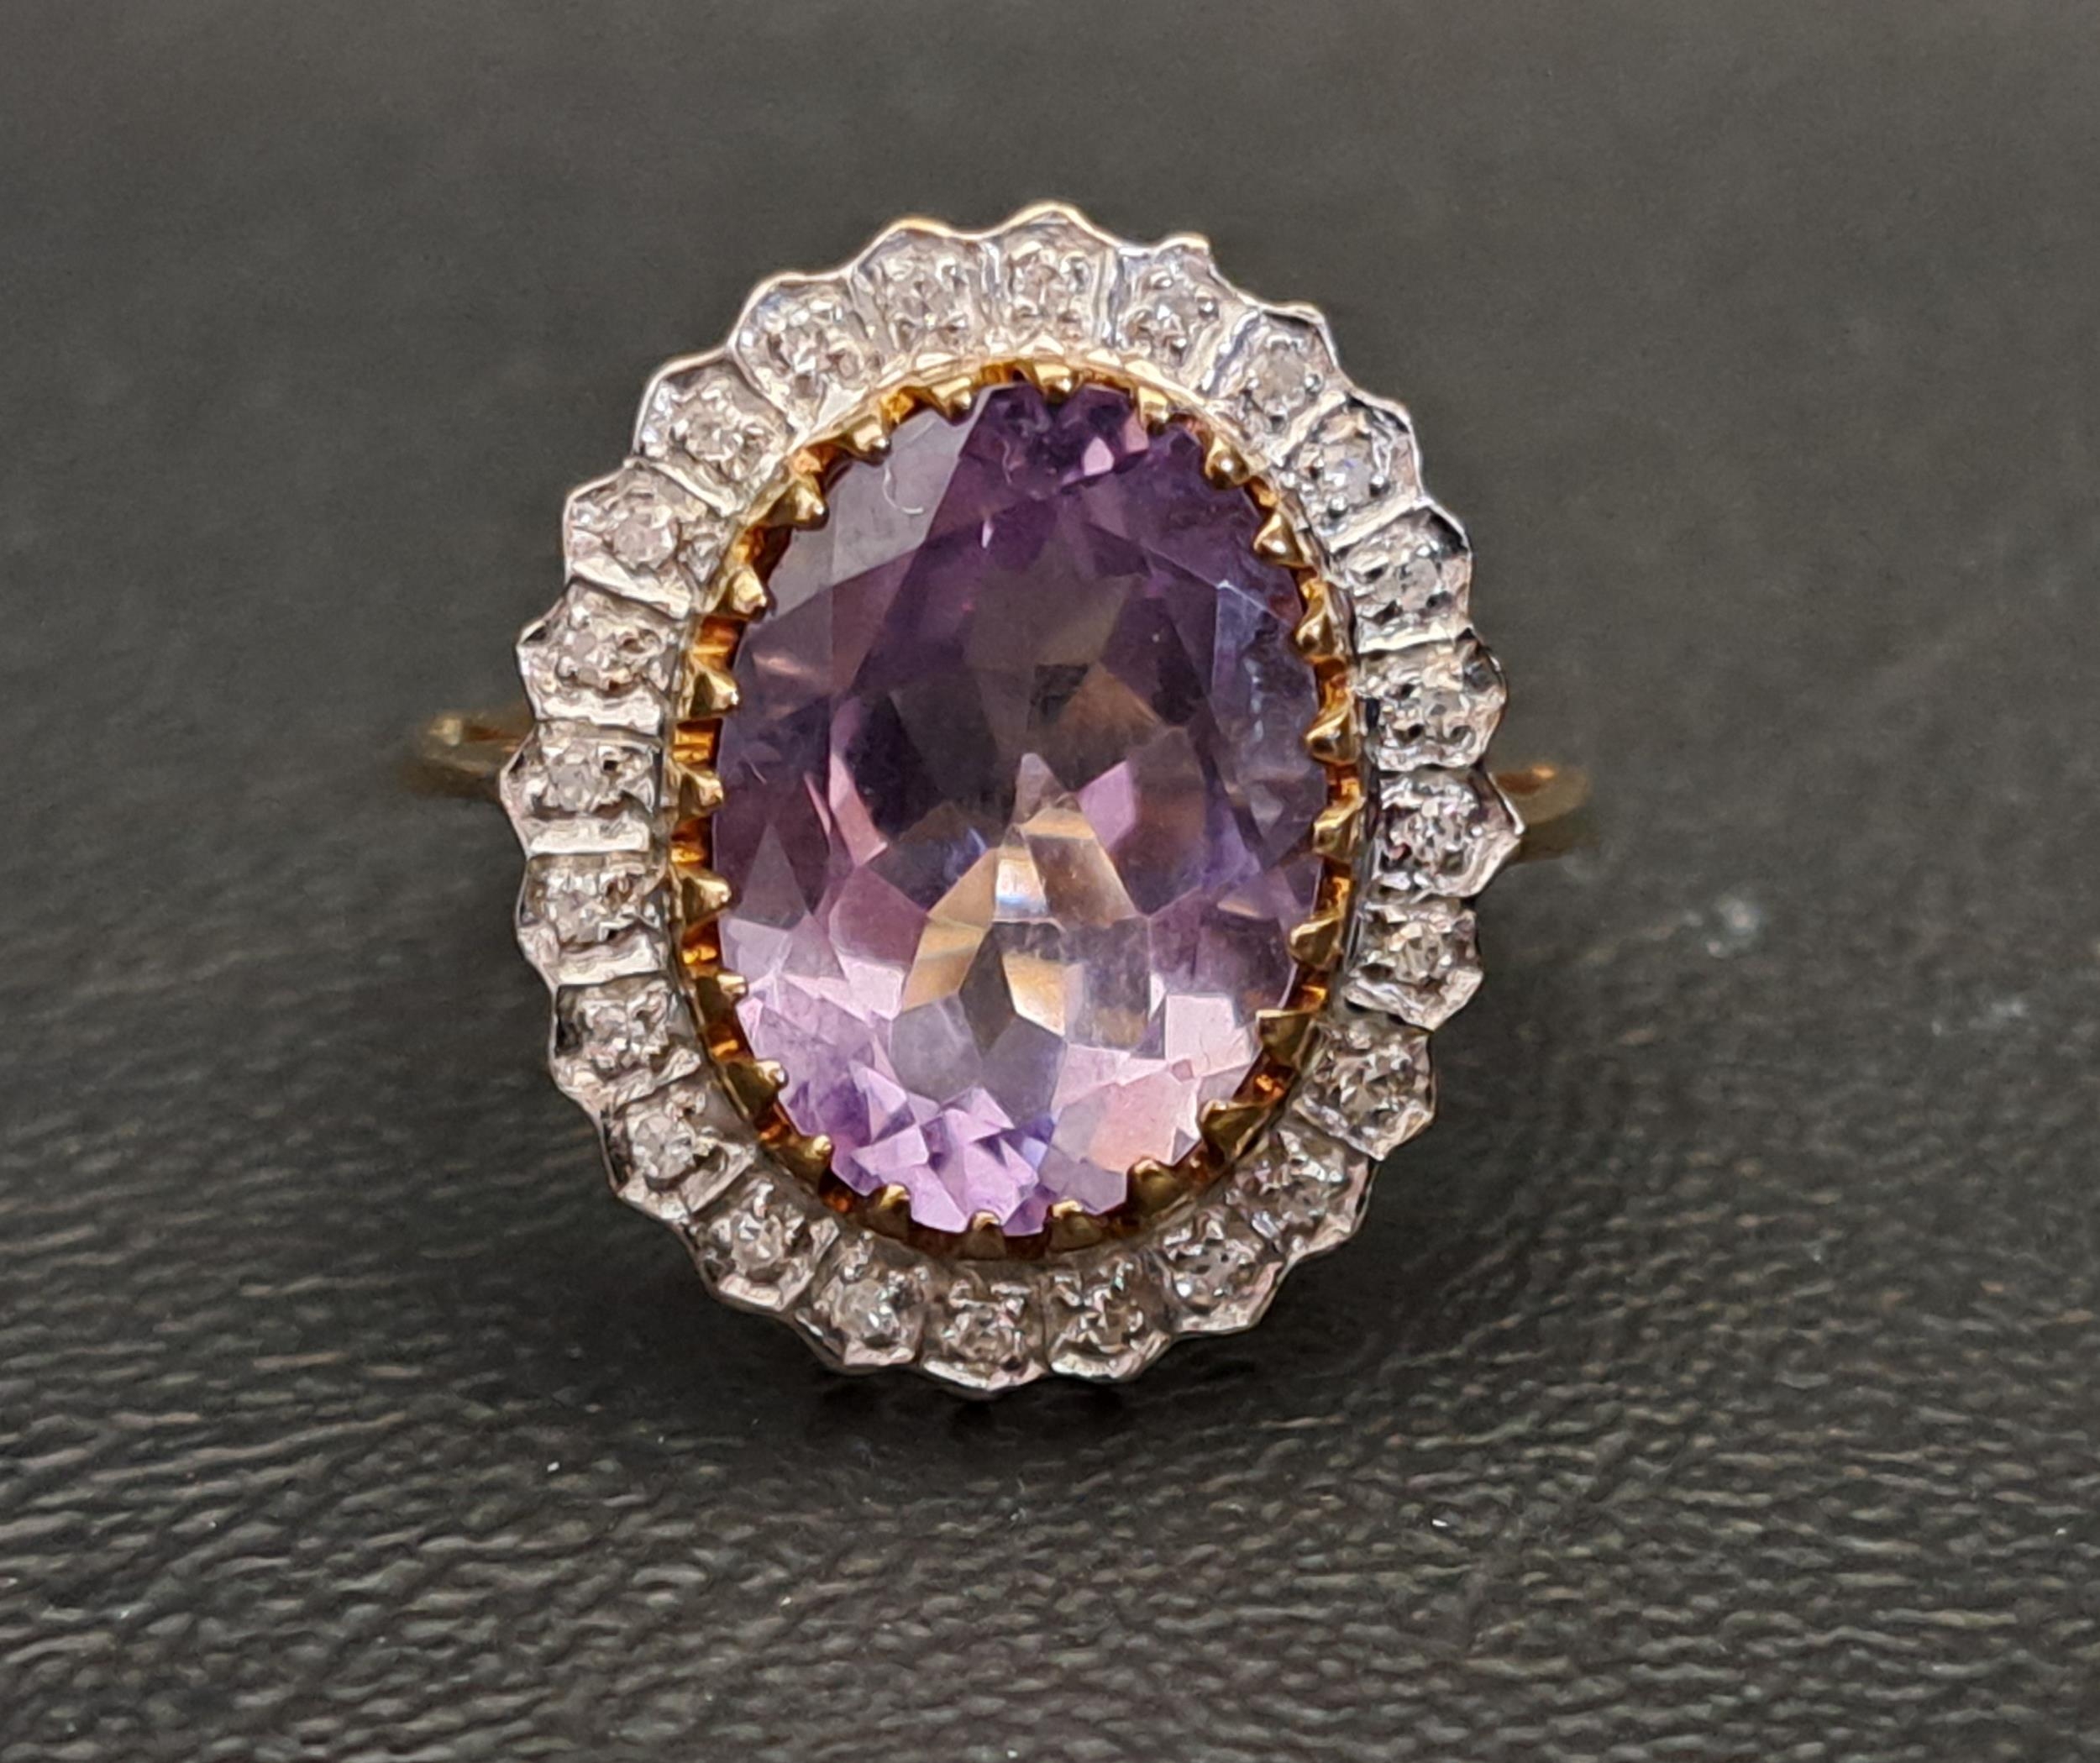 AMETHYST AND DIAMOND CLUSTER RING the central oval cut amethyst measuring approximately 14.1mm x